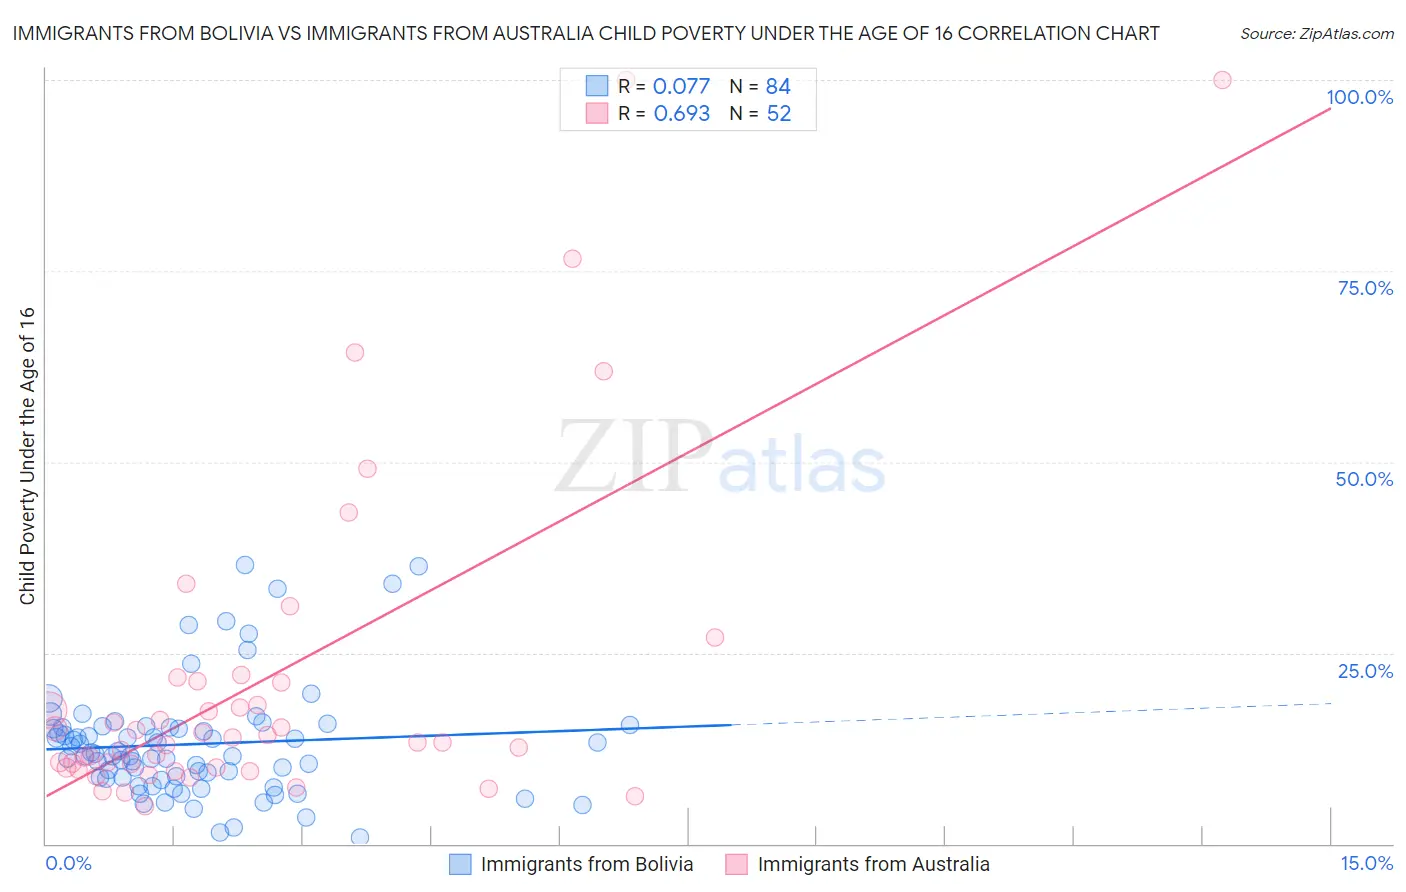 Immigrants from Bolivia vs Immigrants from Australia Child Poverty Under the Age of 16